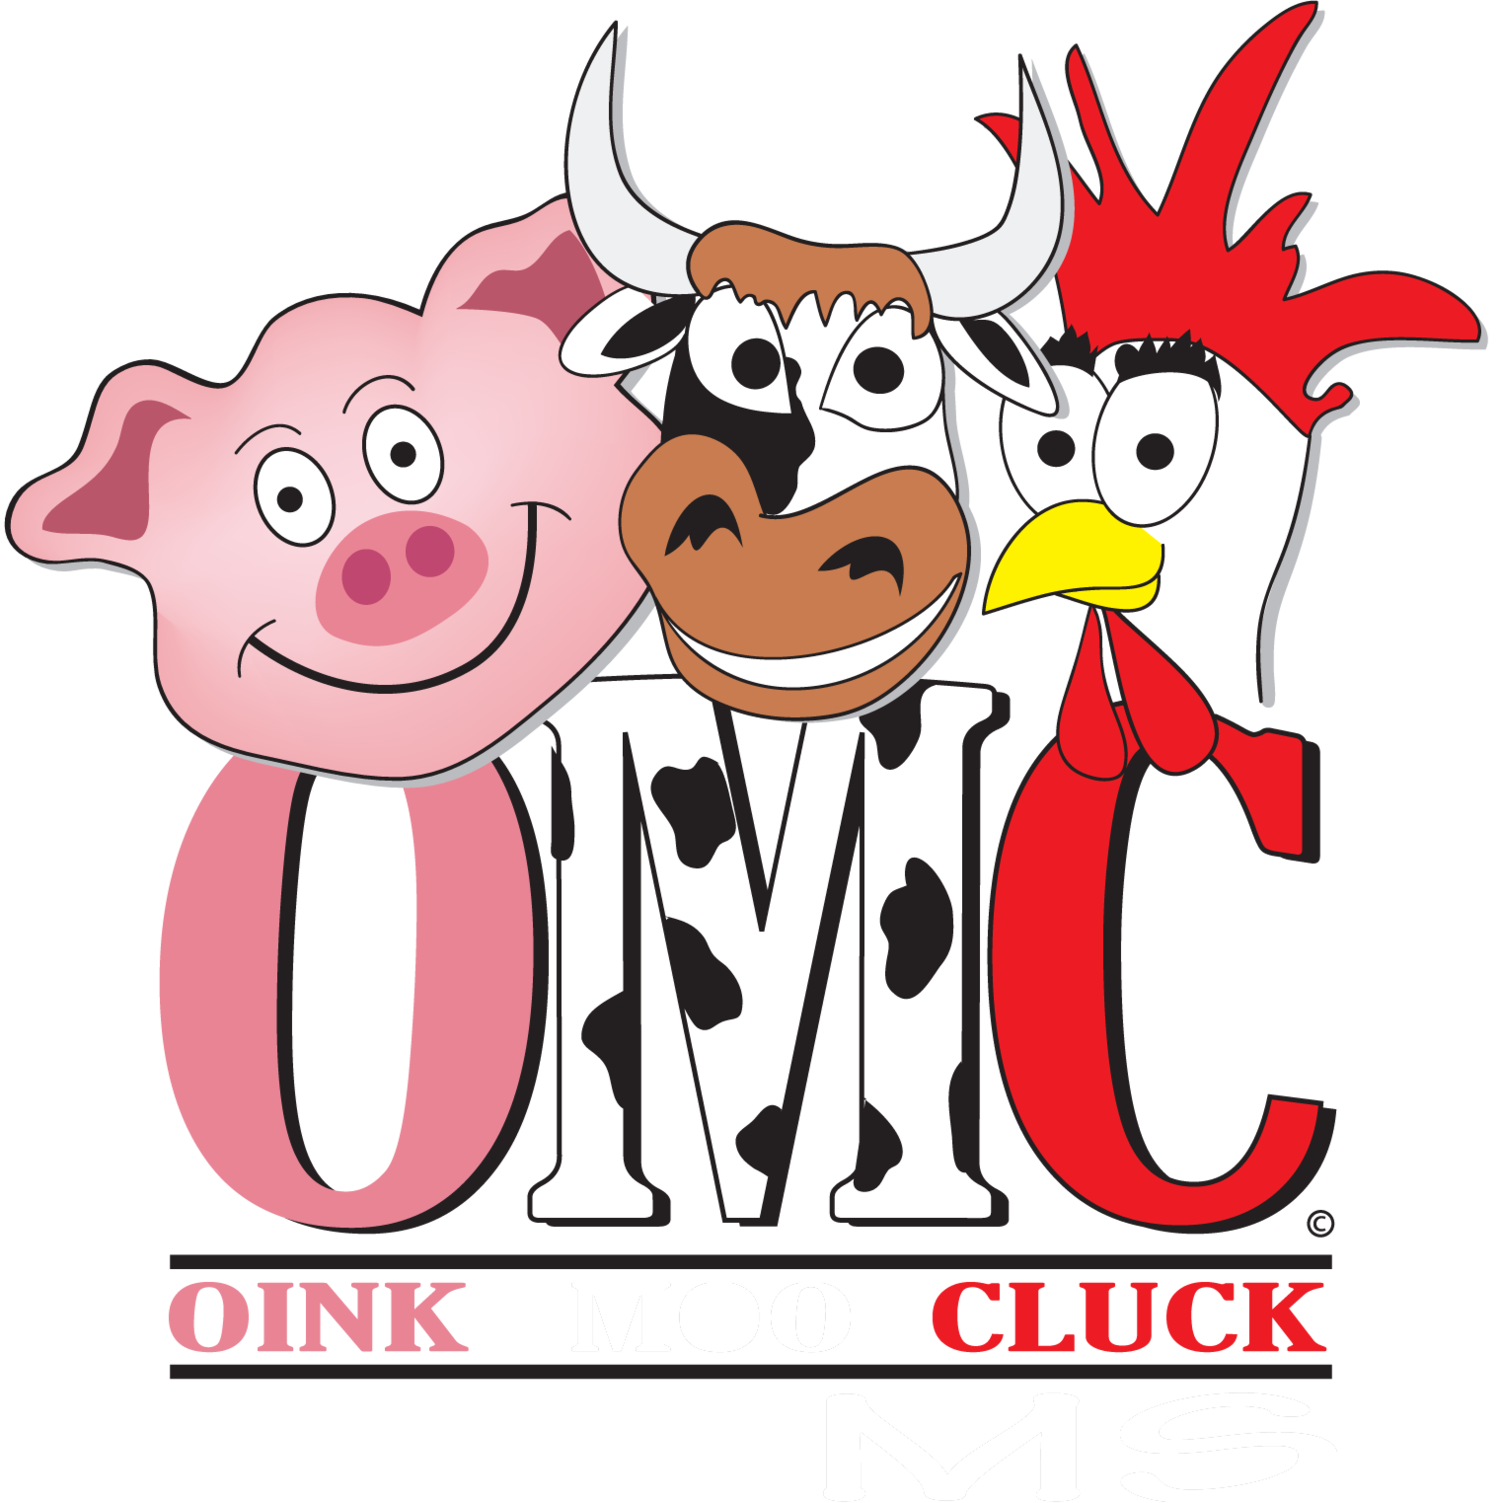 Oink Moo Cluck